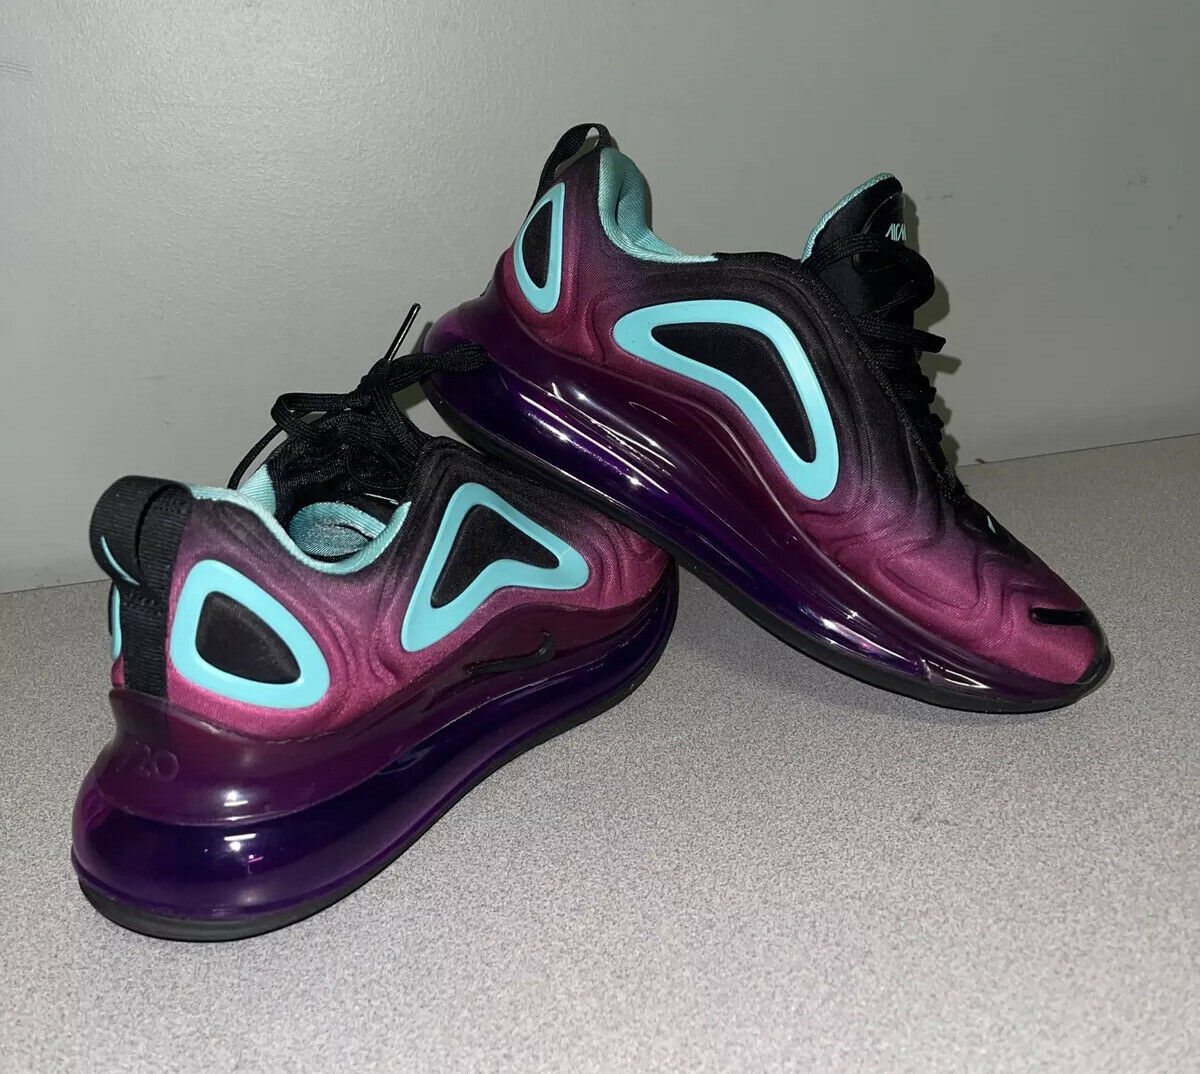 Nike Air Max 720 Hyper Violet Shoes Size 5Y Womens 6.5 AQ3196 500 Sneakers